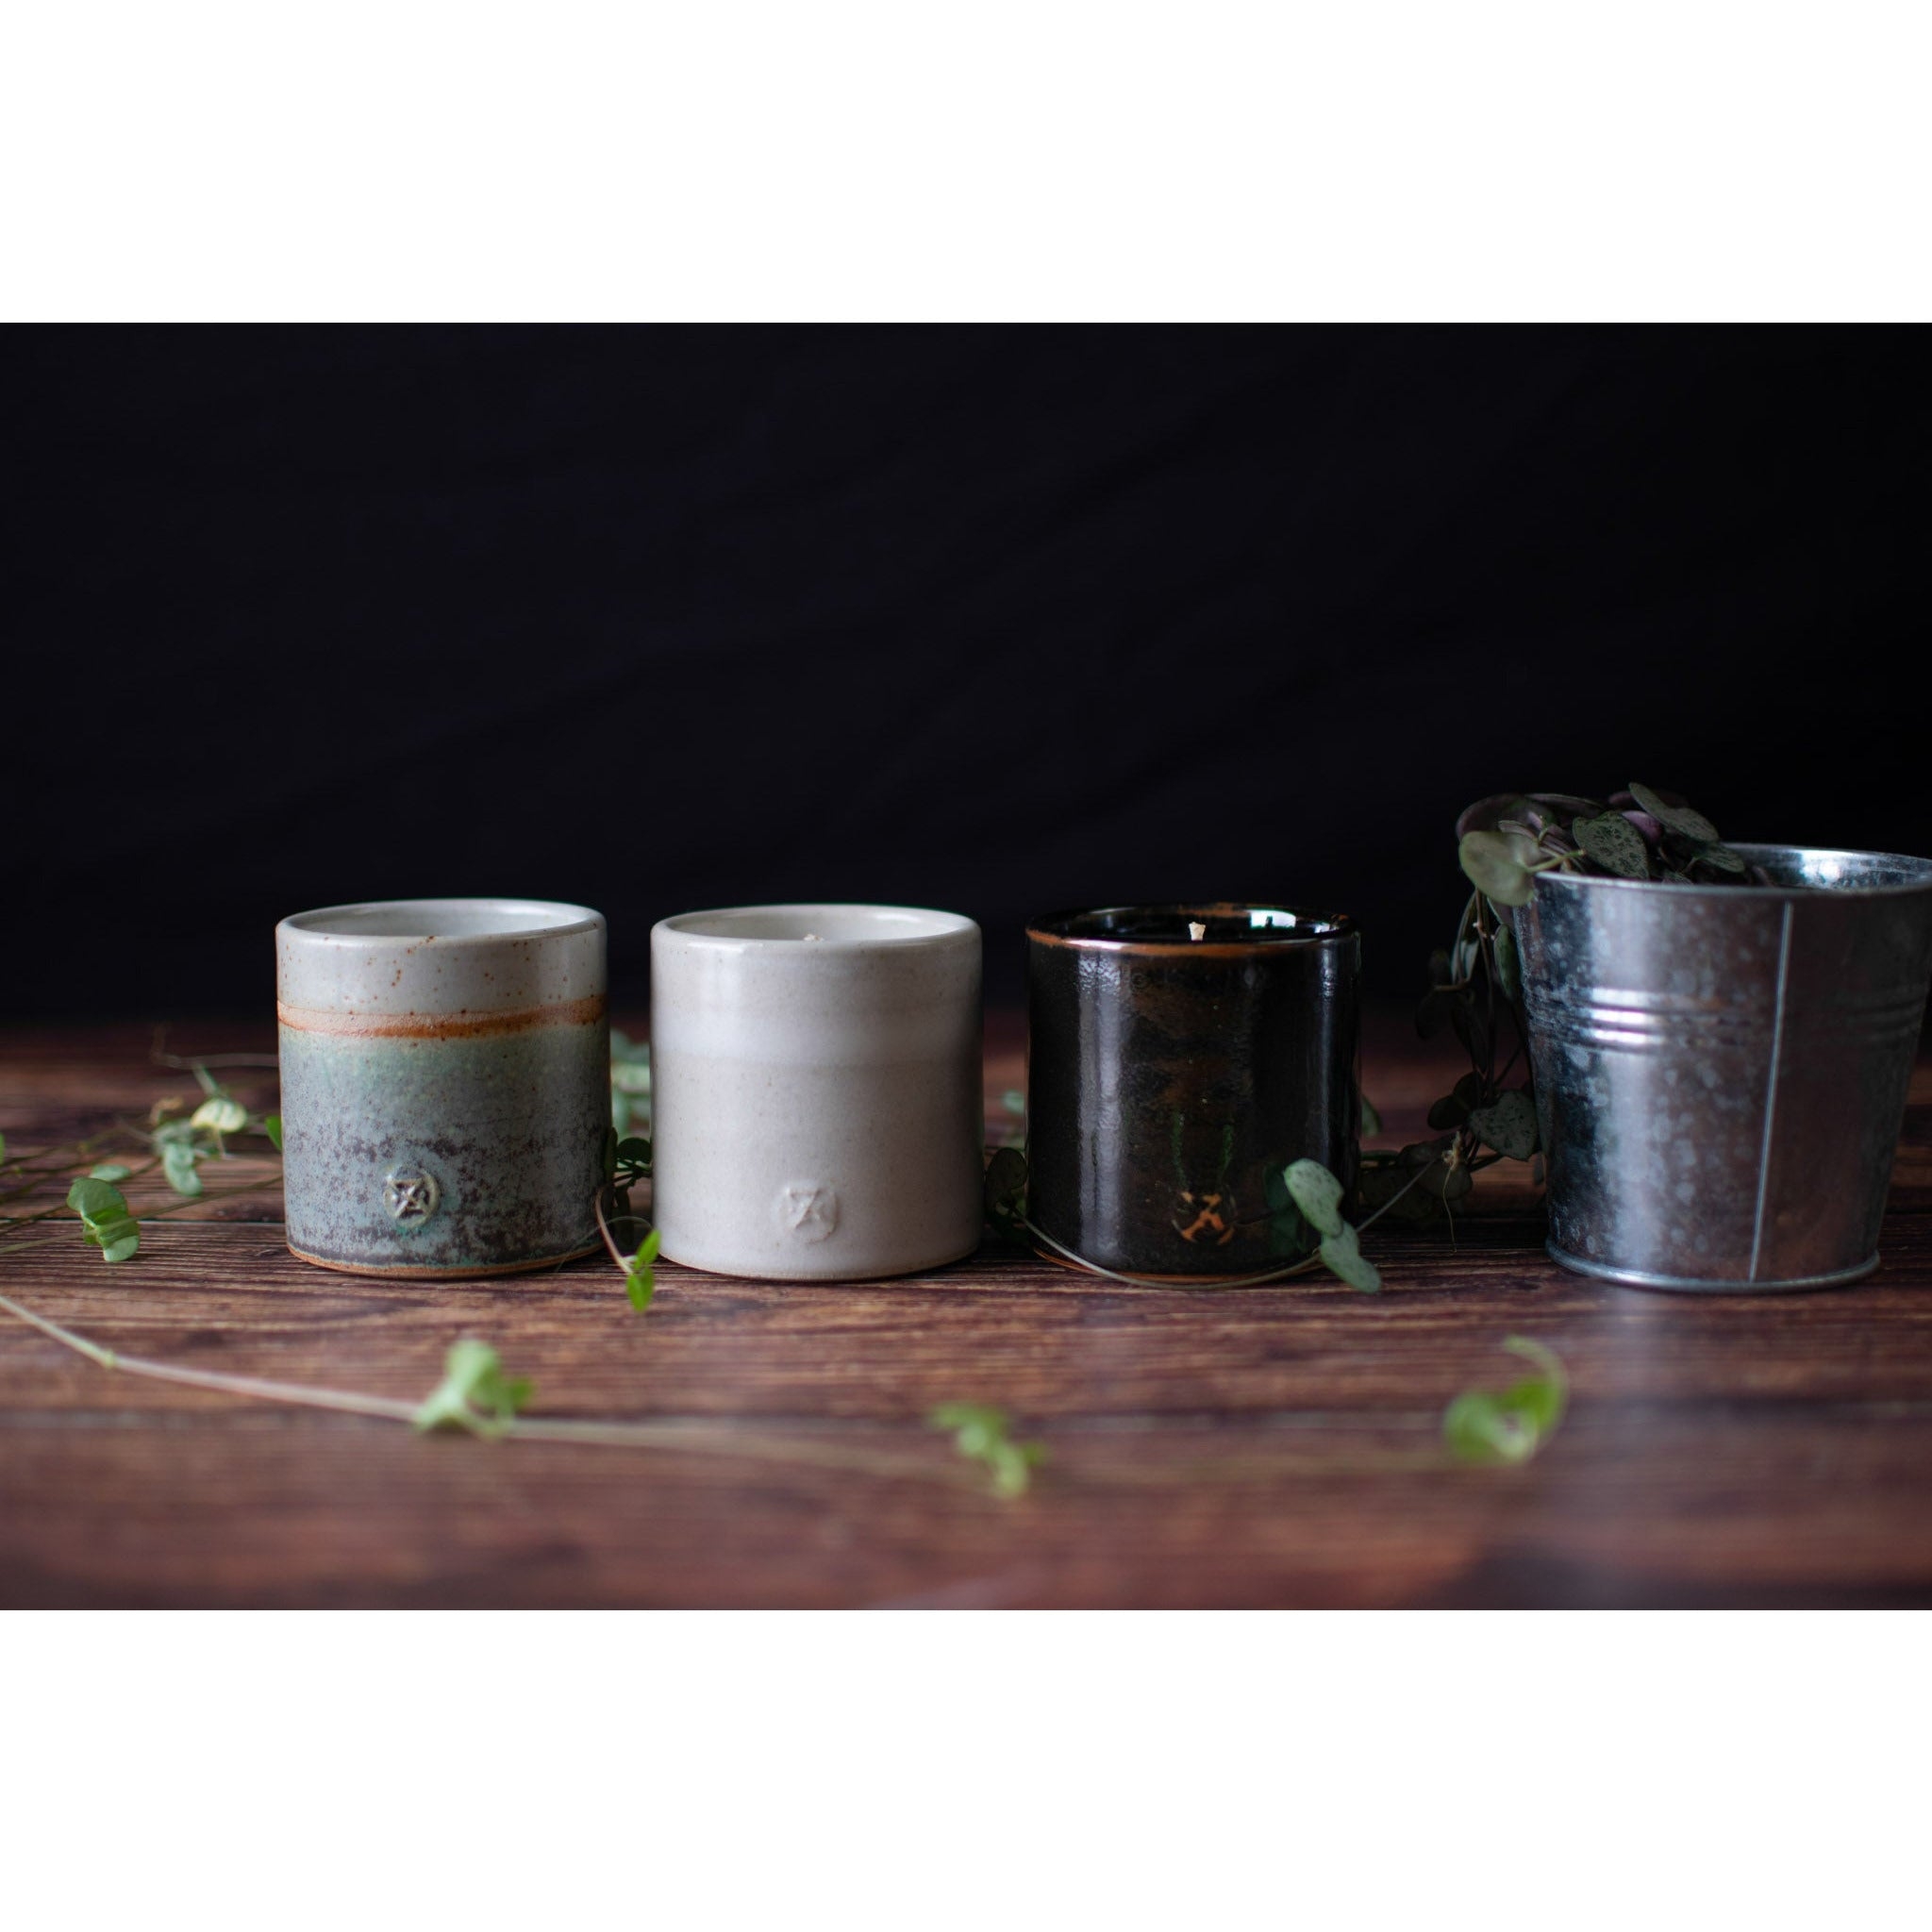 Small Potters Candle – Green – Night BloomIng JasmIne – Etties Candles